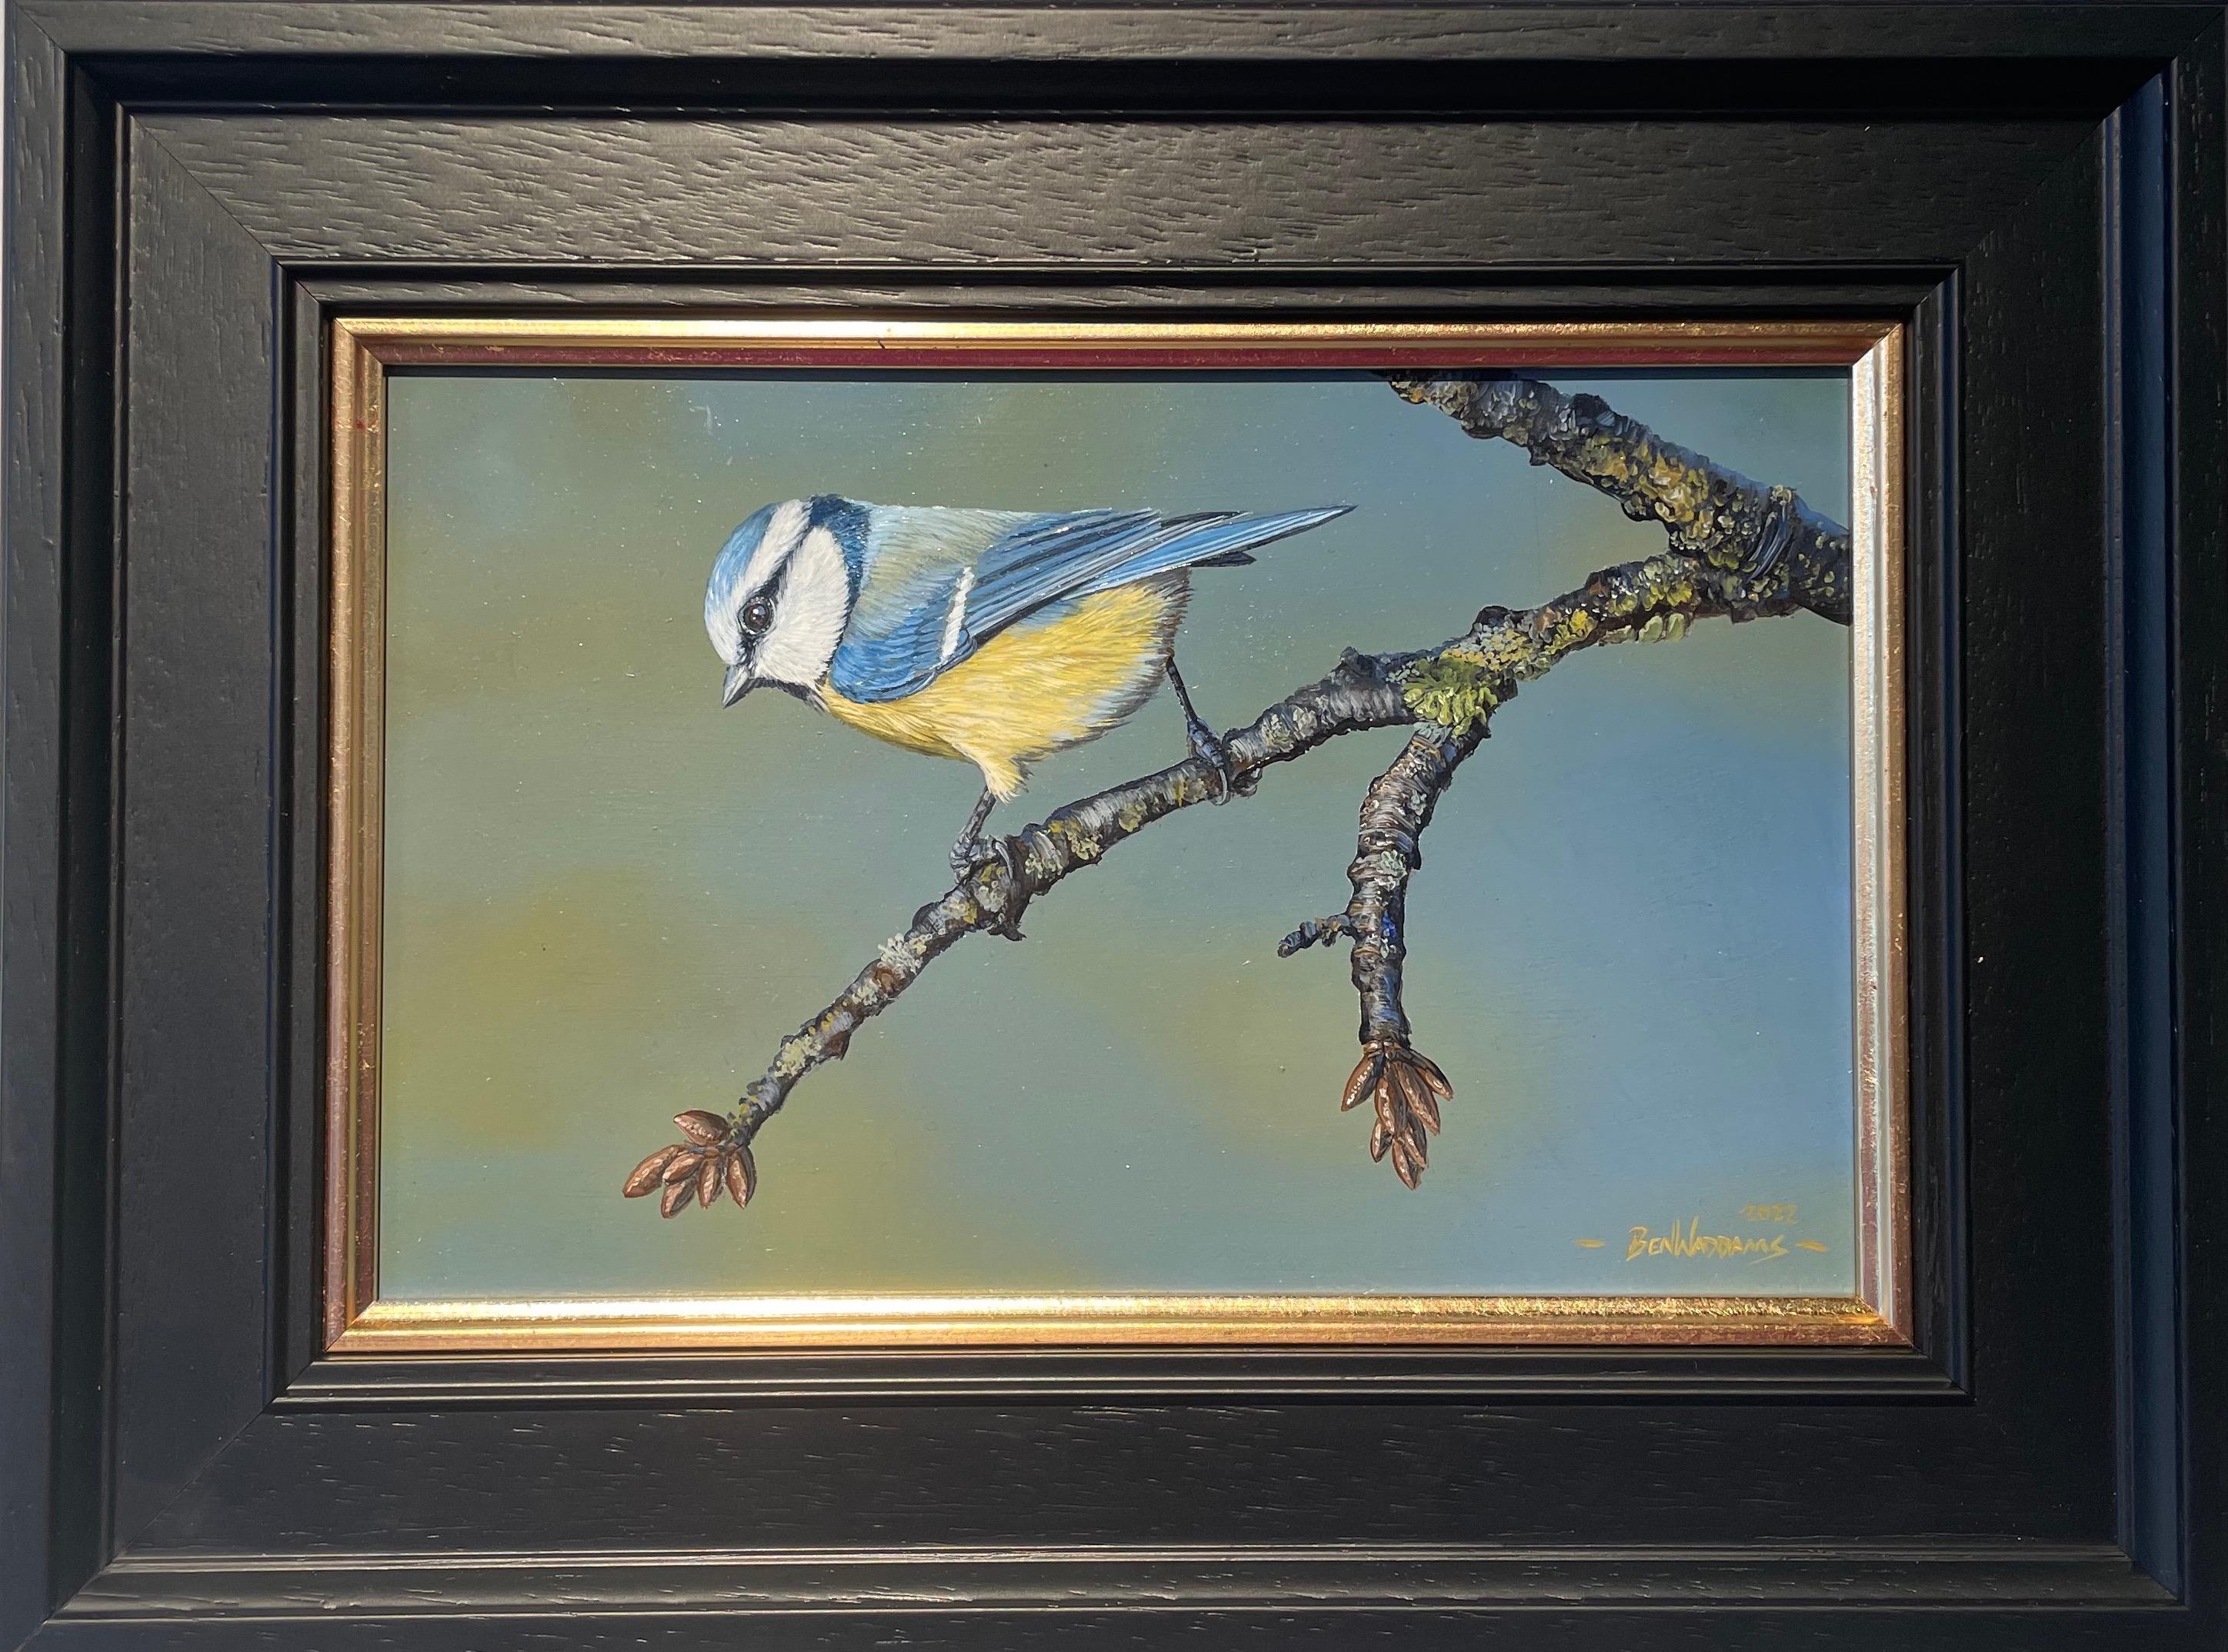 'Promise of Spring' by Ben Waddams is a Contemporary Realist Wildlife oil painting of an English Blue Tit bird on a branch. With such incredible detail you almost expect the bird to take flight!   

Ben Waddams is a British wildlife artist living